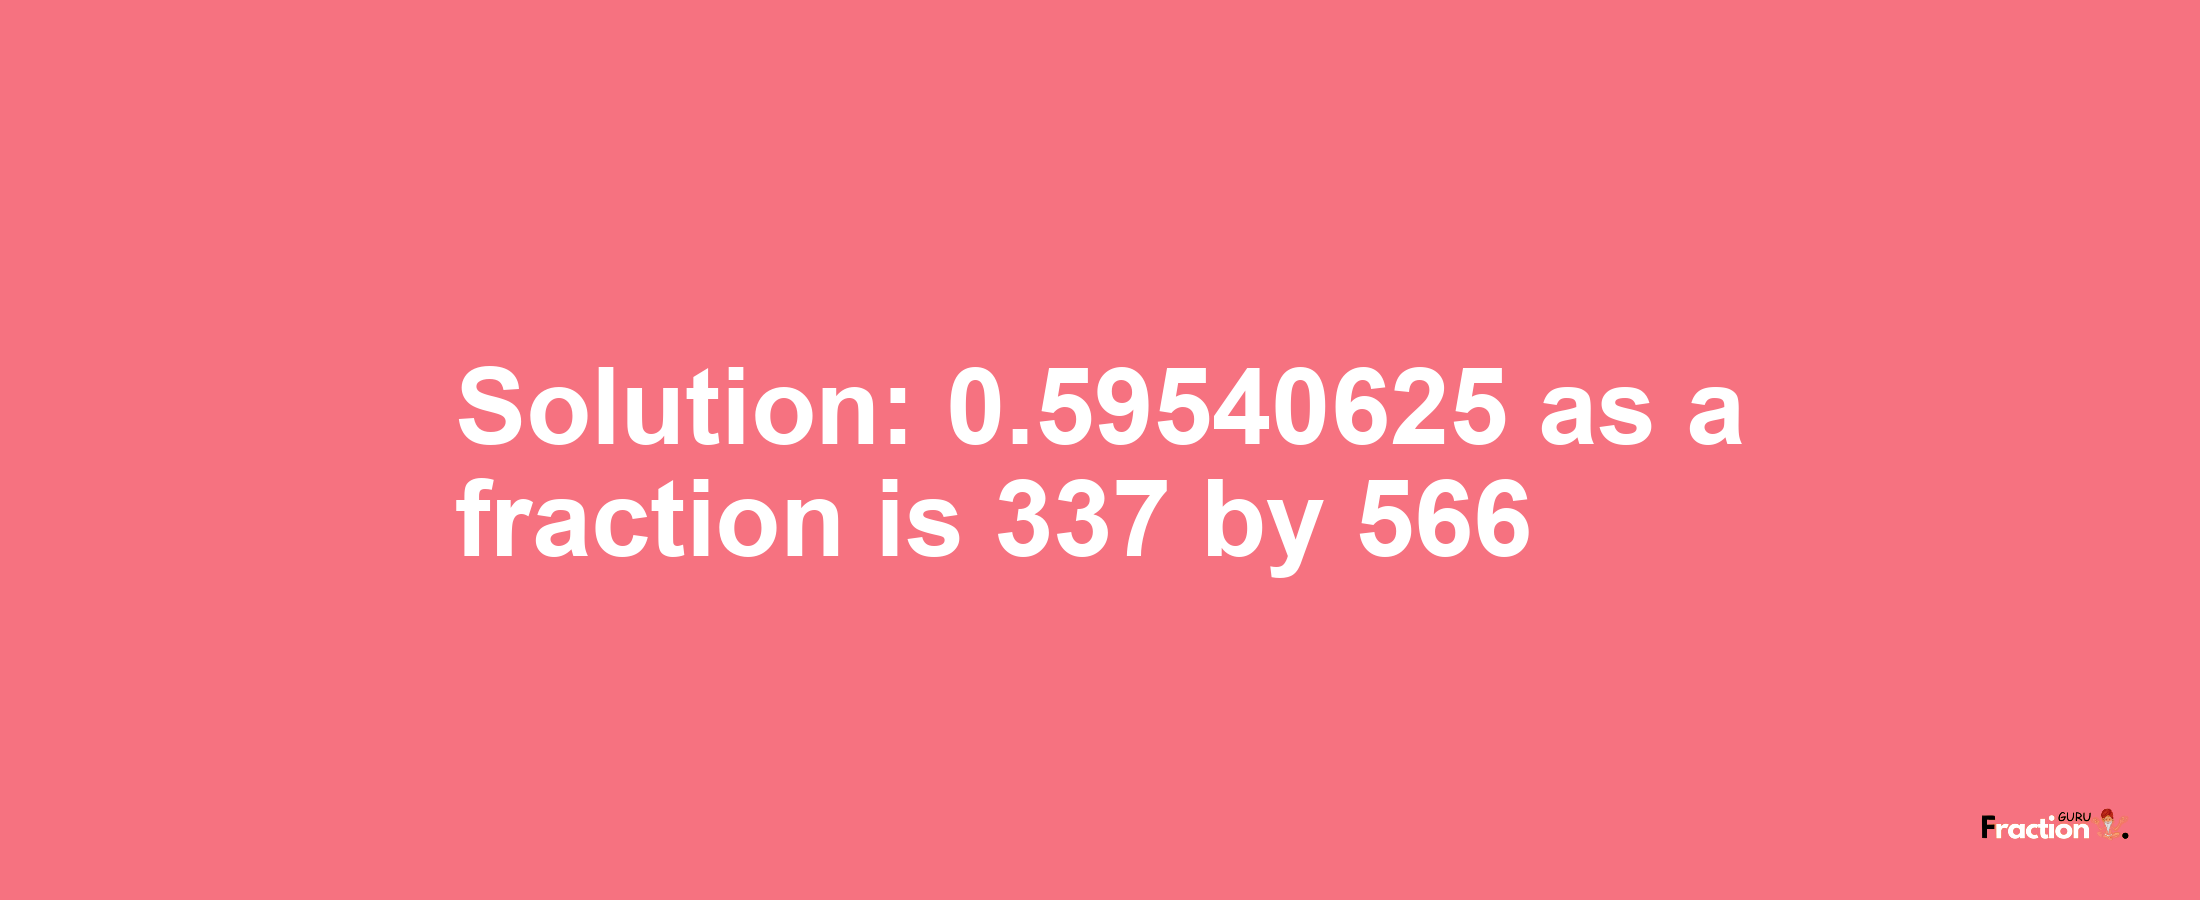 Solution:0.59540625 as a fraction is 337/566